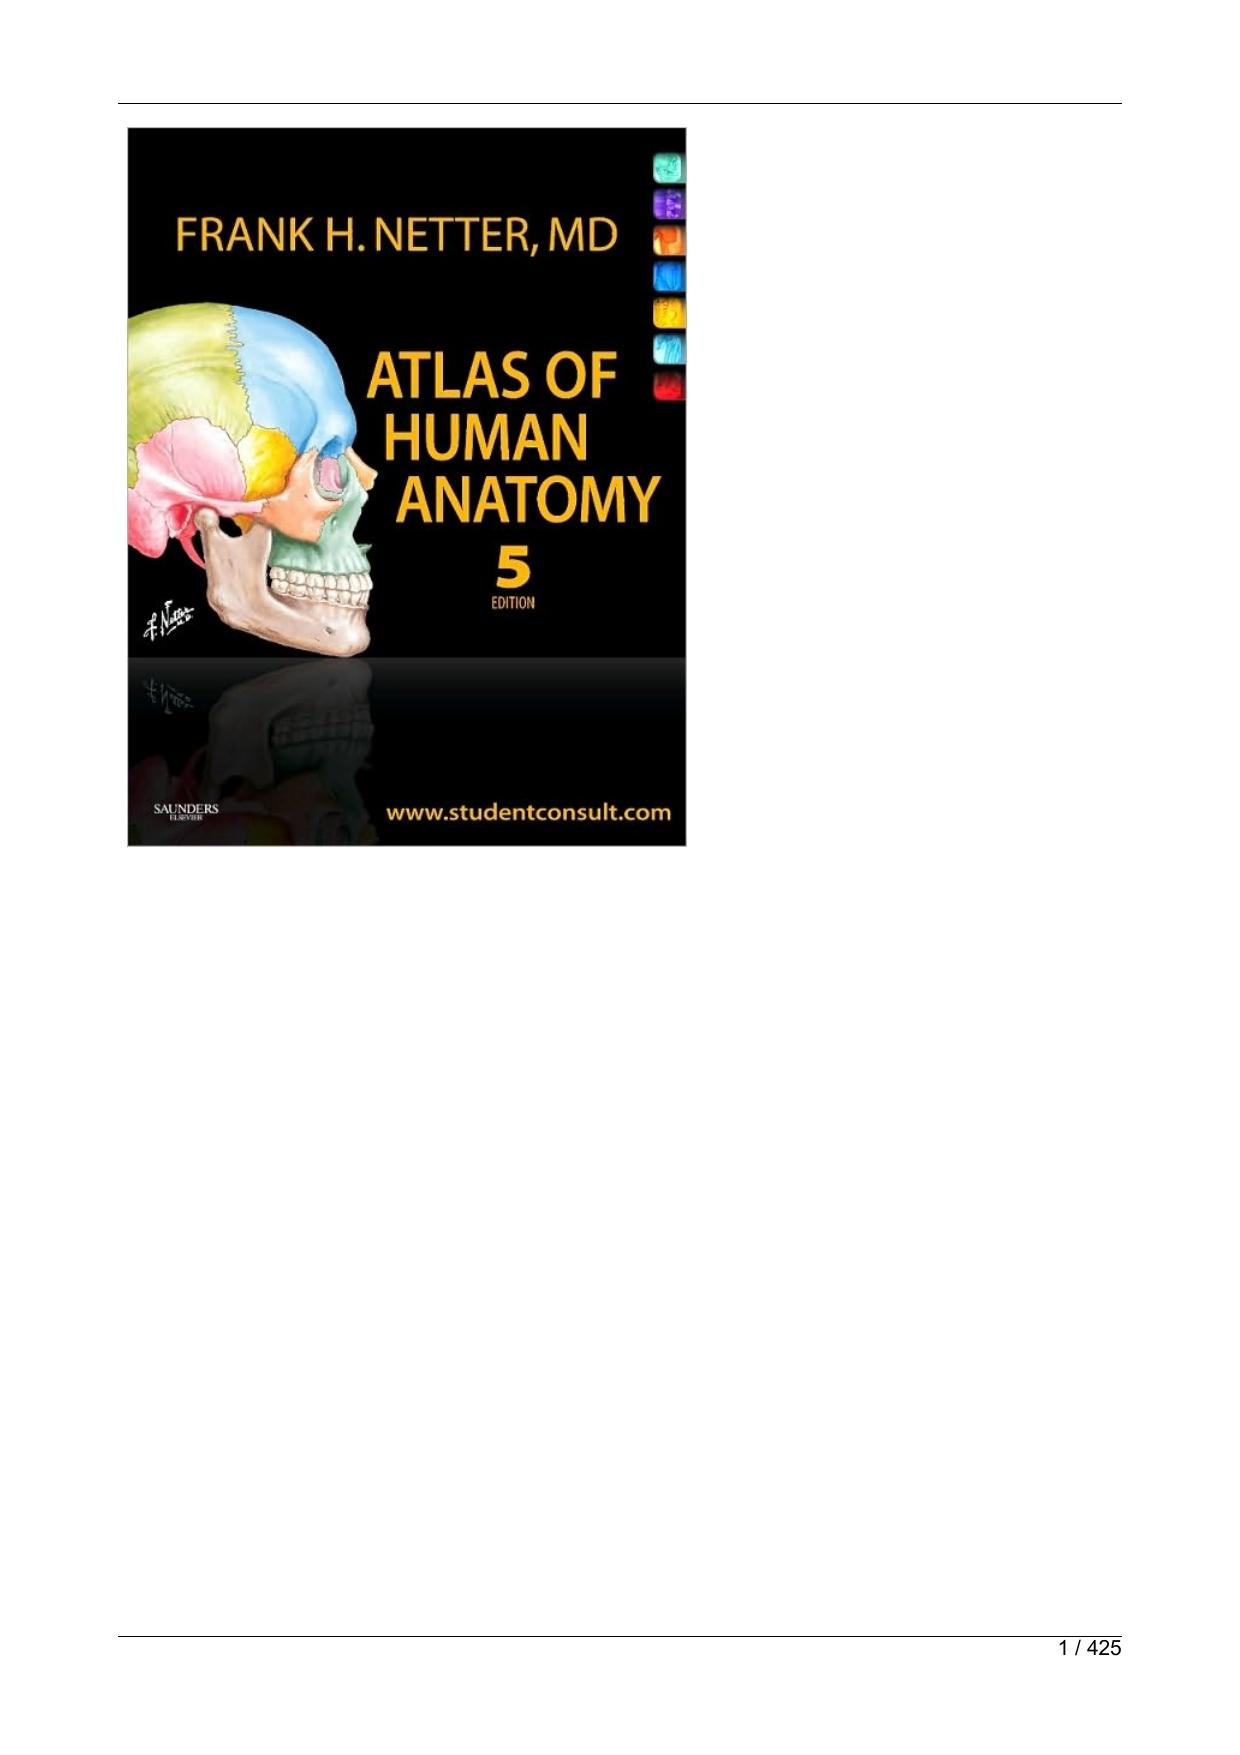 Atlas of Human Anatomy by Netter 5th ed